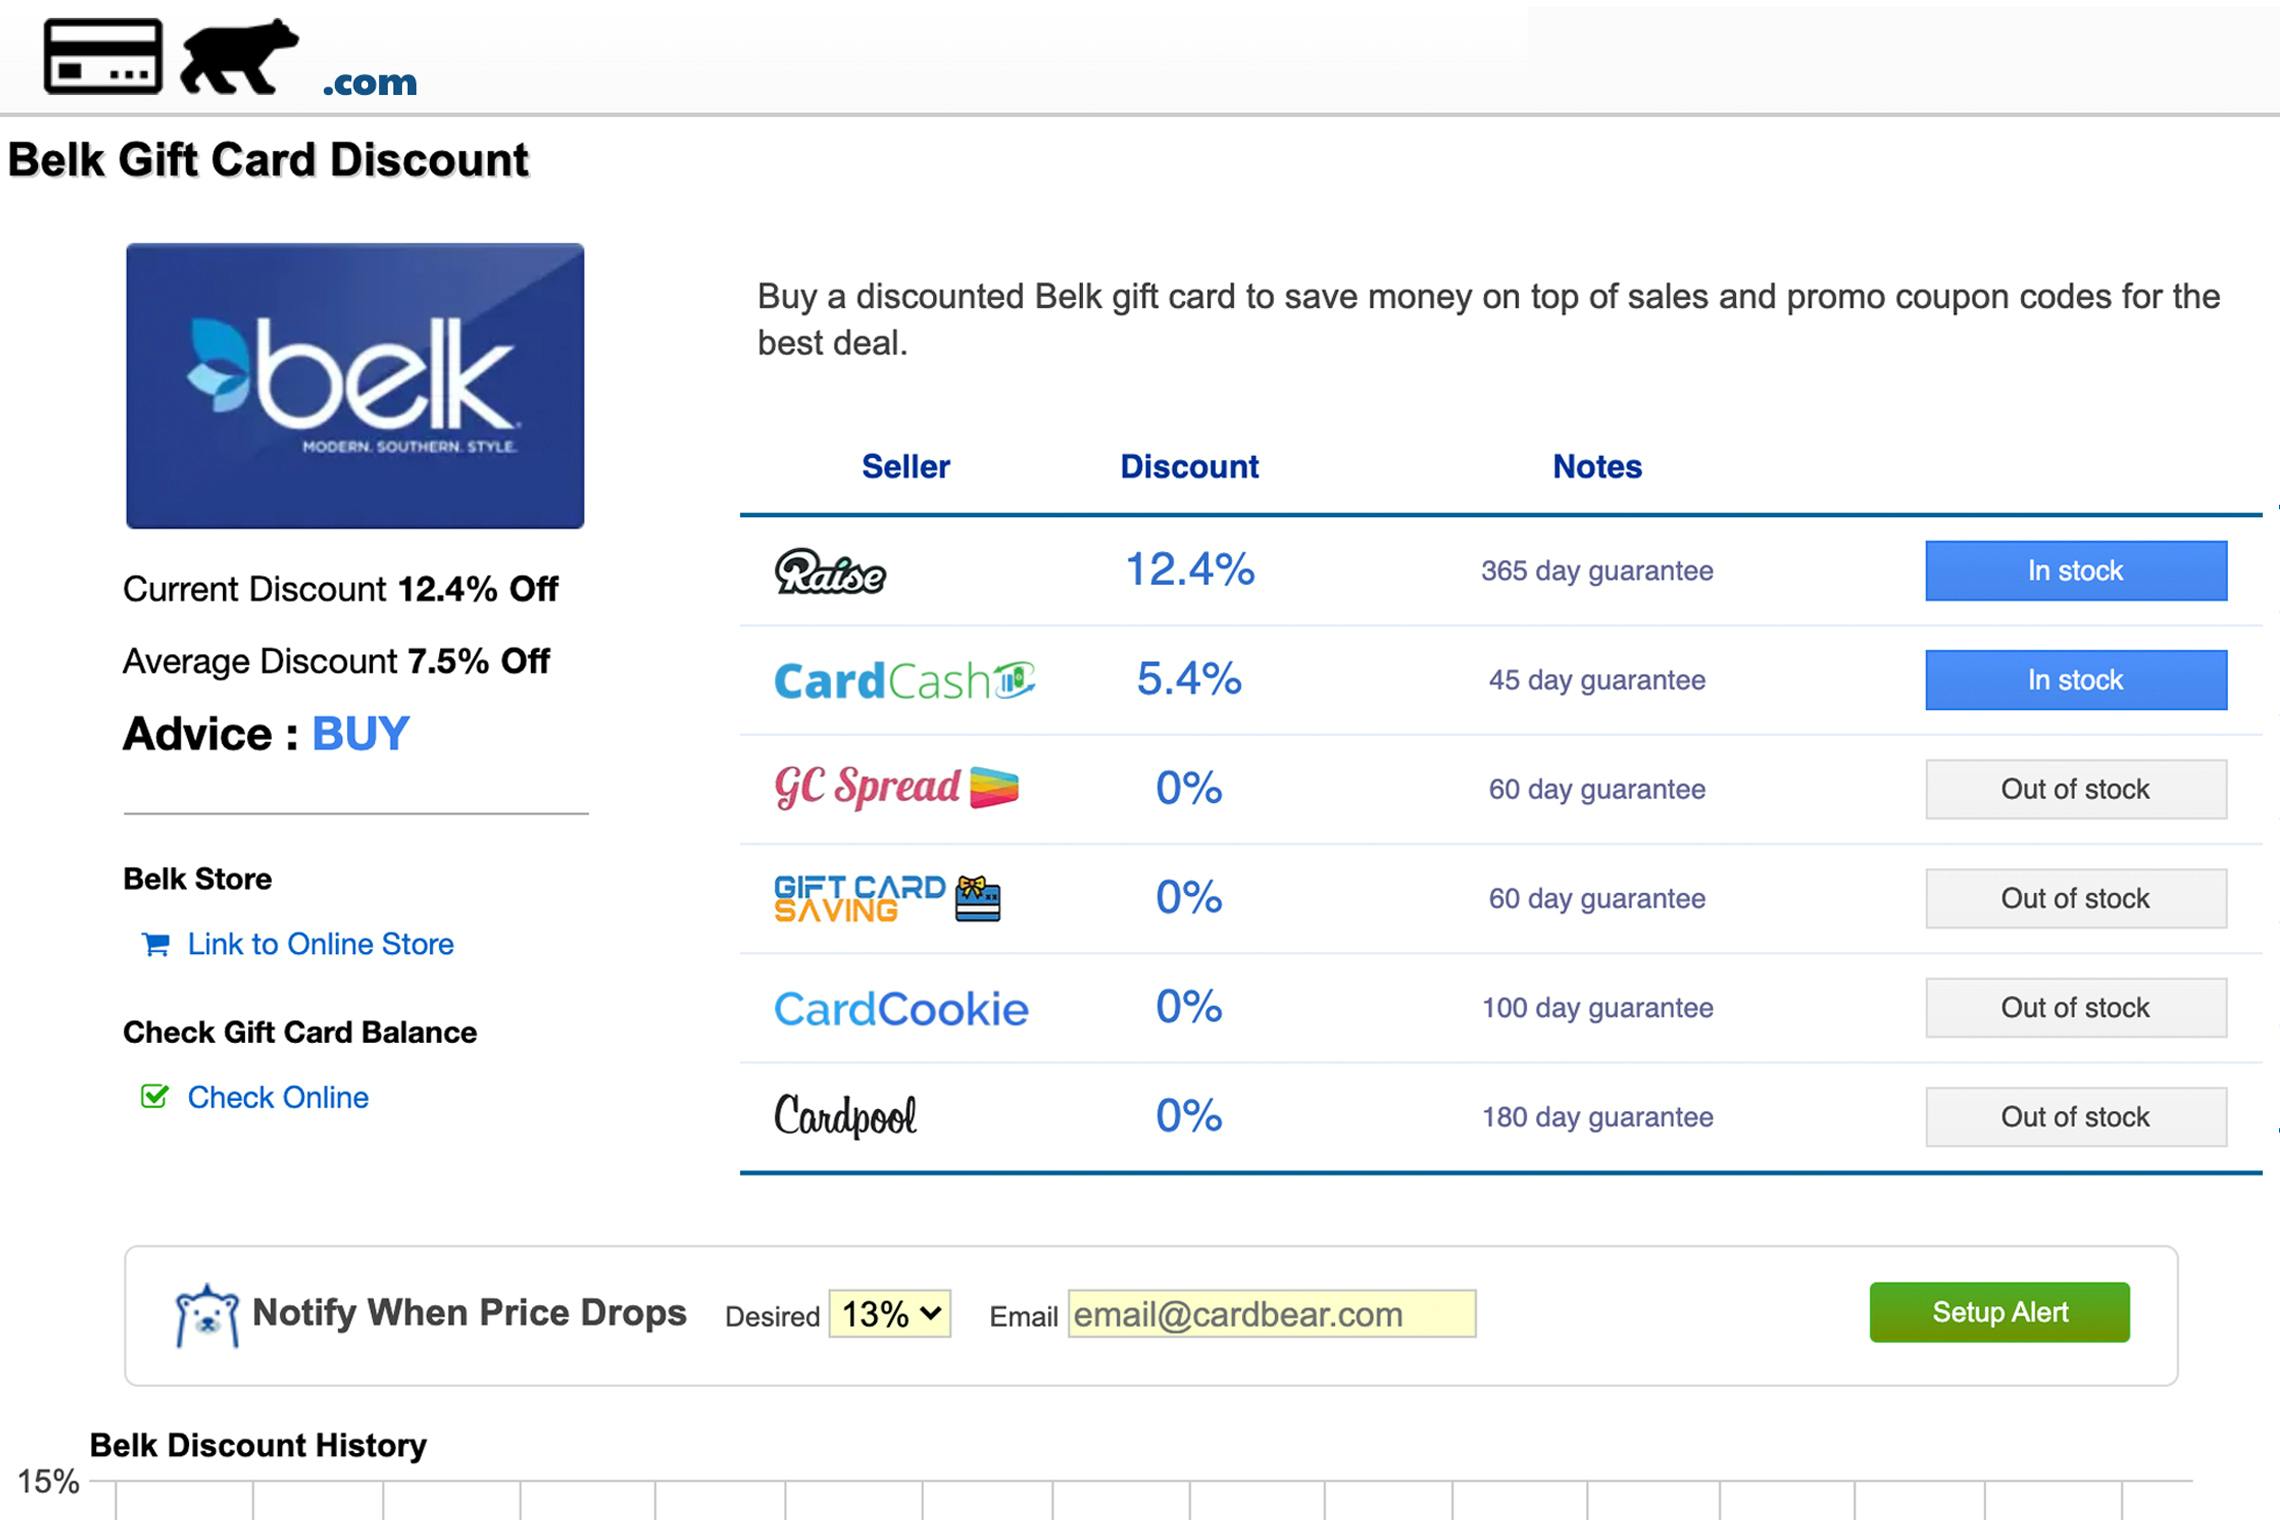 17 Belk Coupon Shopping Tips to Save You Money Online and ...